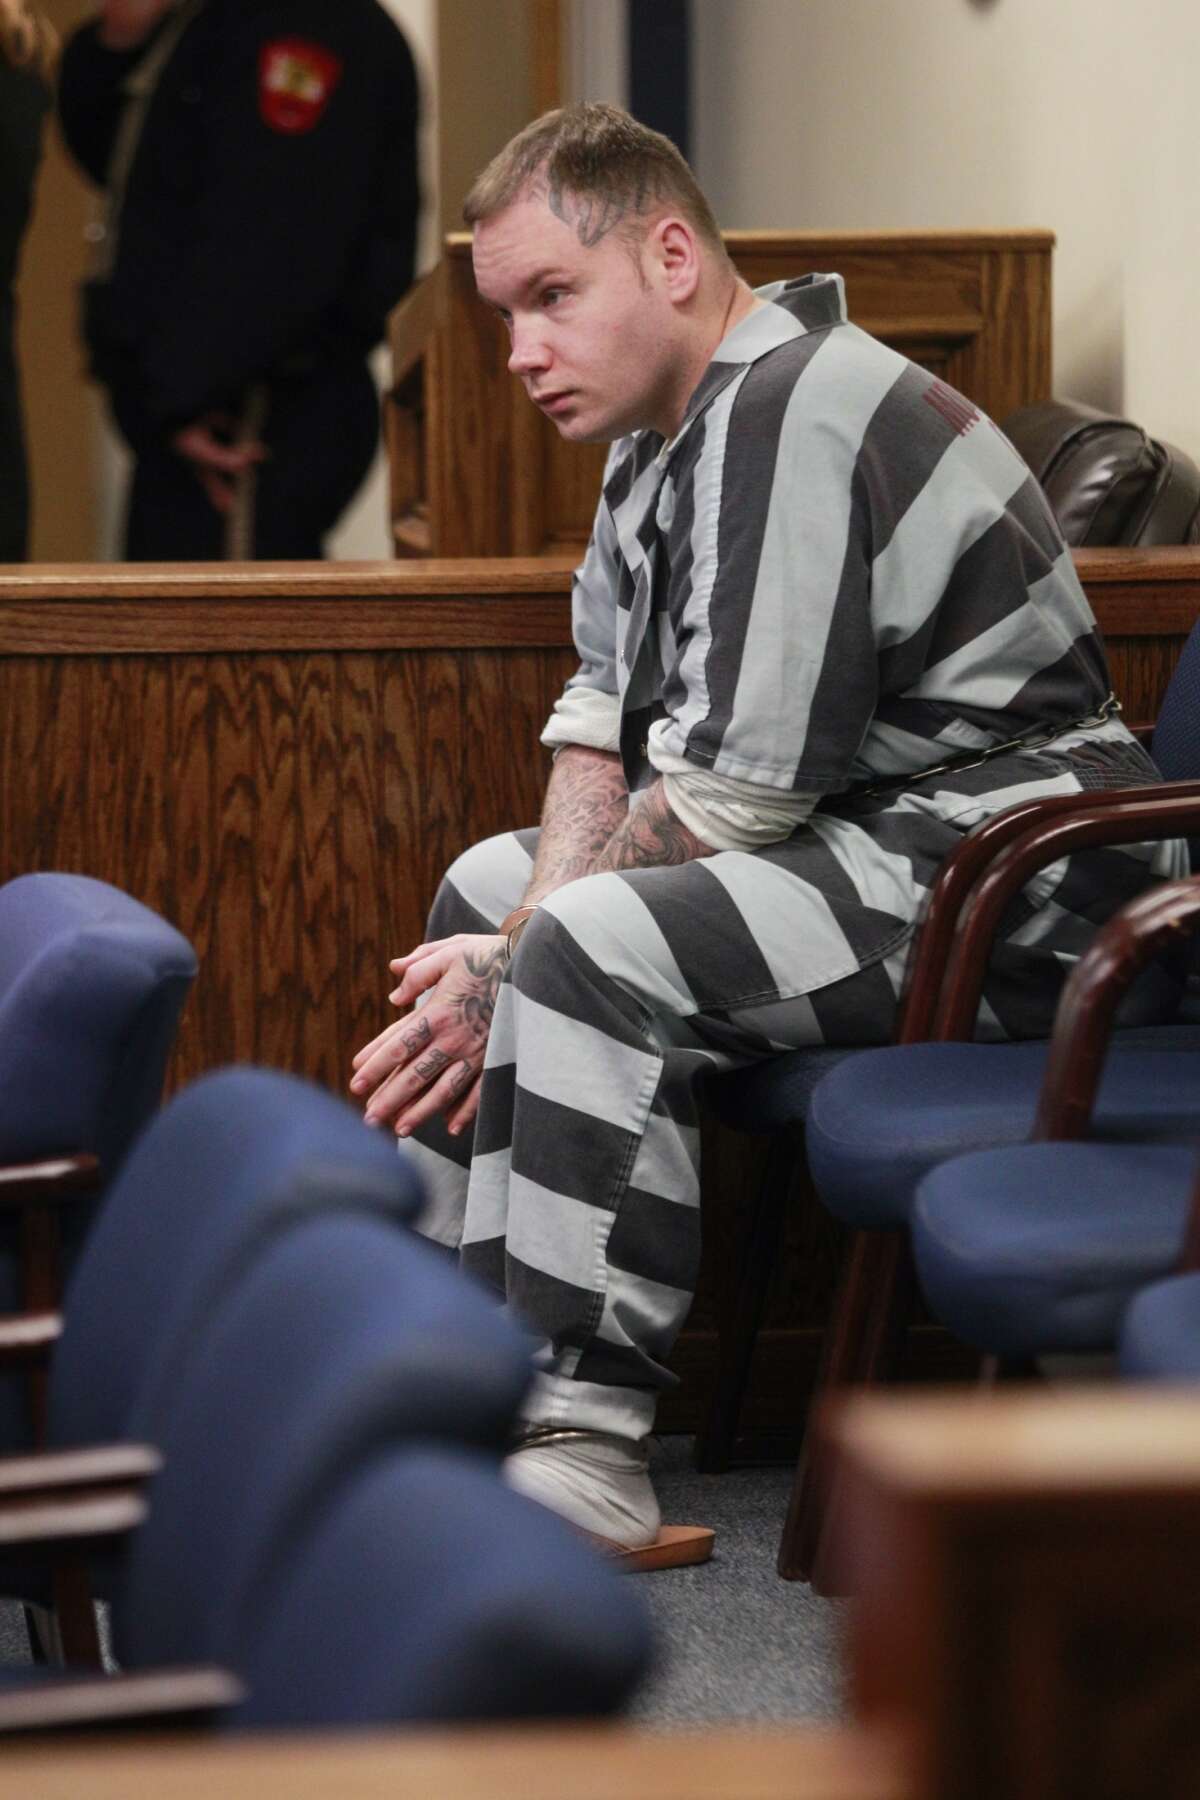 Donald Collins sits in the 359th State District Court on Thursday, March 6, 2014, in Conroe waiting to be transported after Judge Kathleen Hamilton ruled that he will be tried as an adult for allegedly setting 8-year-old Robert Middleton on fire with gasoline in 1998. Robert died in 2011.